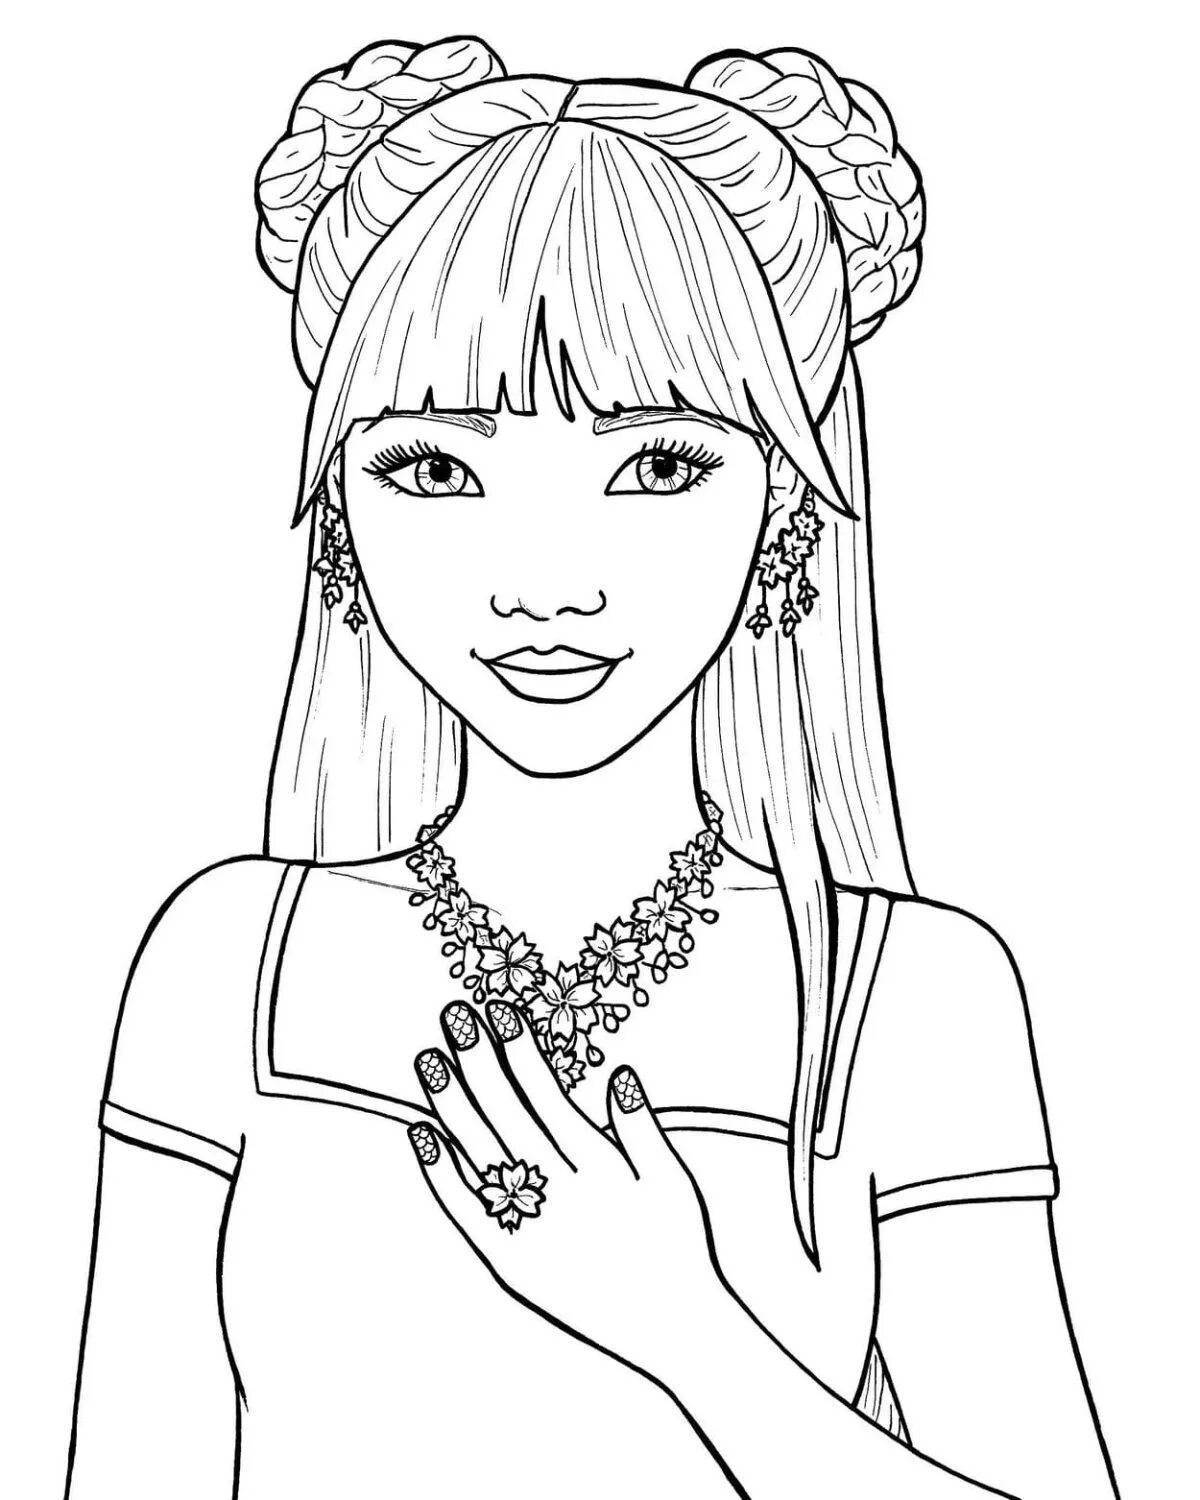 Color frenzy coloring page miss tee